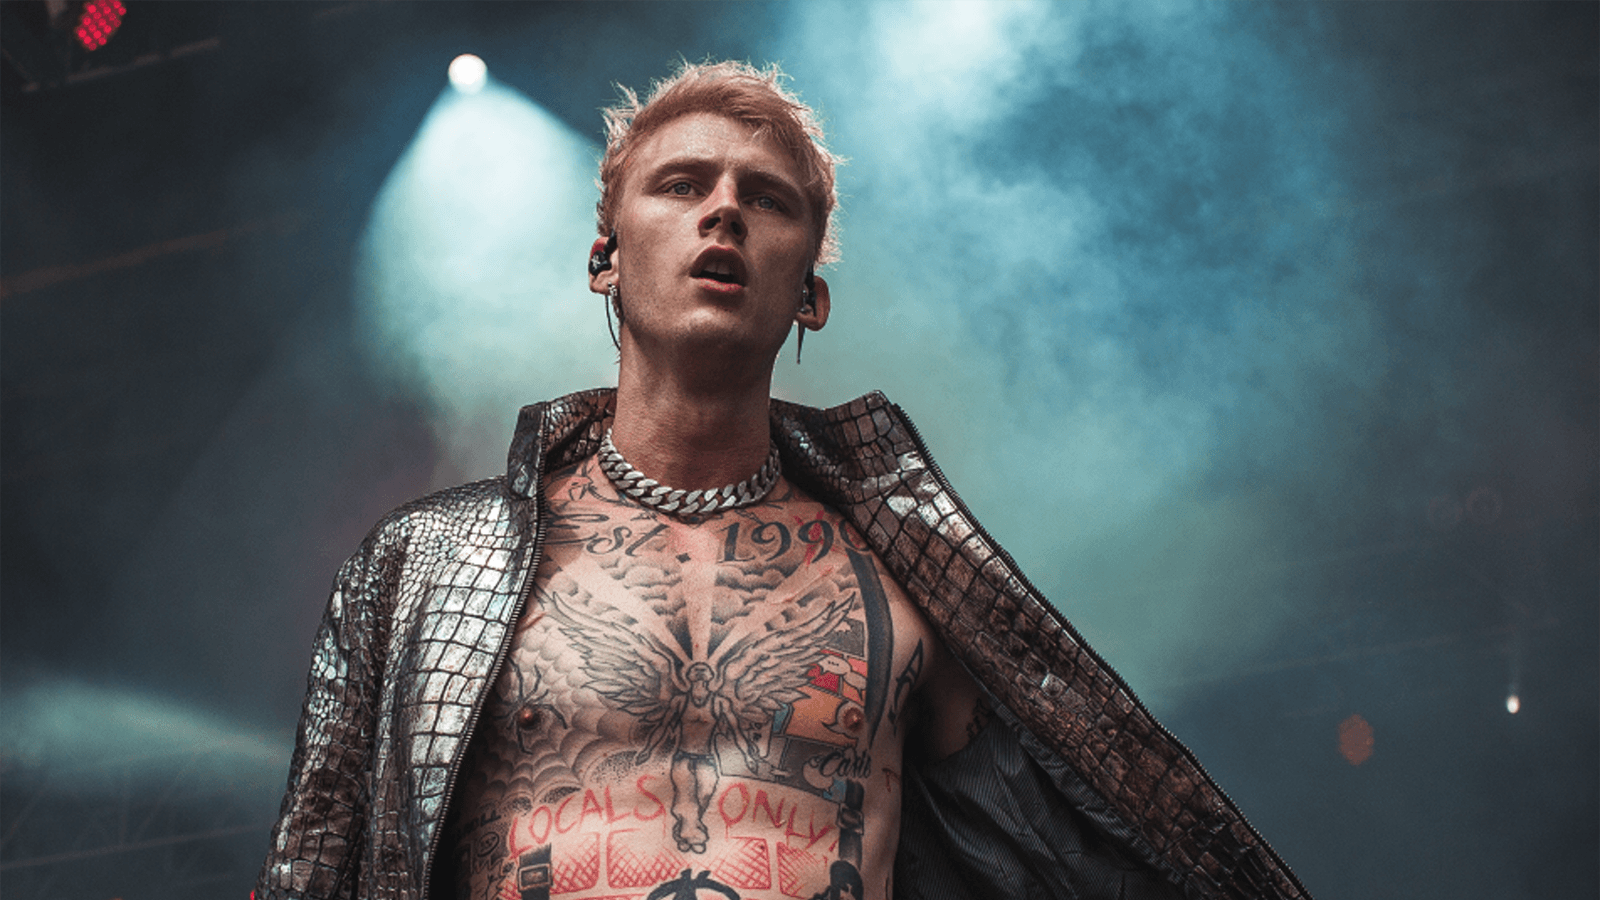 See Machine Gun Kelly Delve Into Dark State of Mind in New Lately